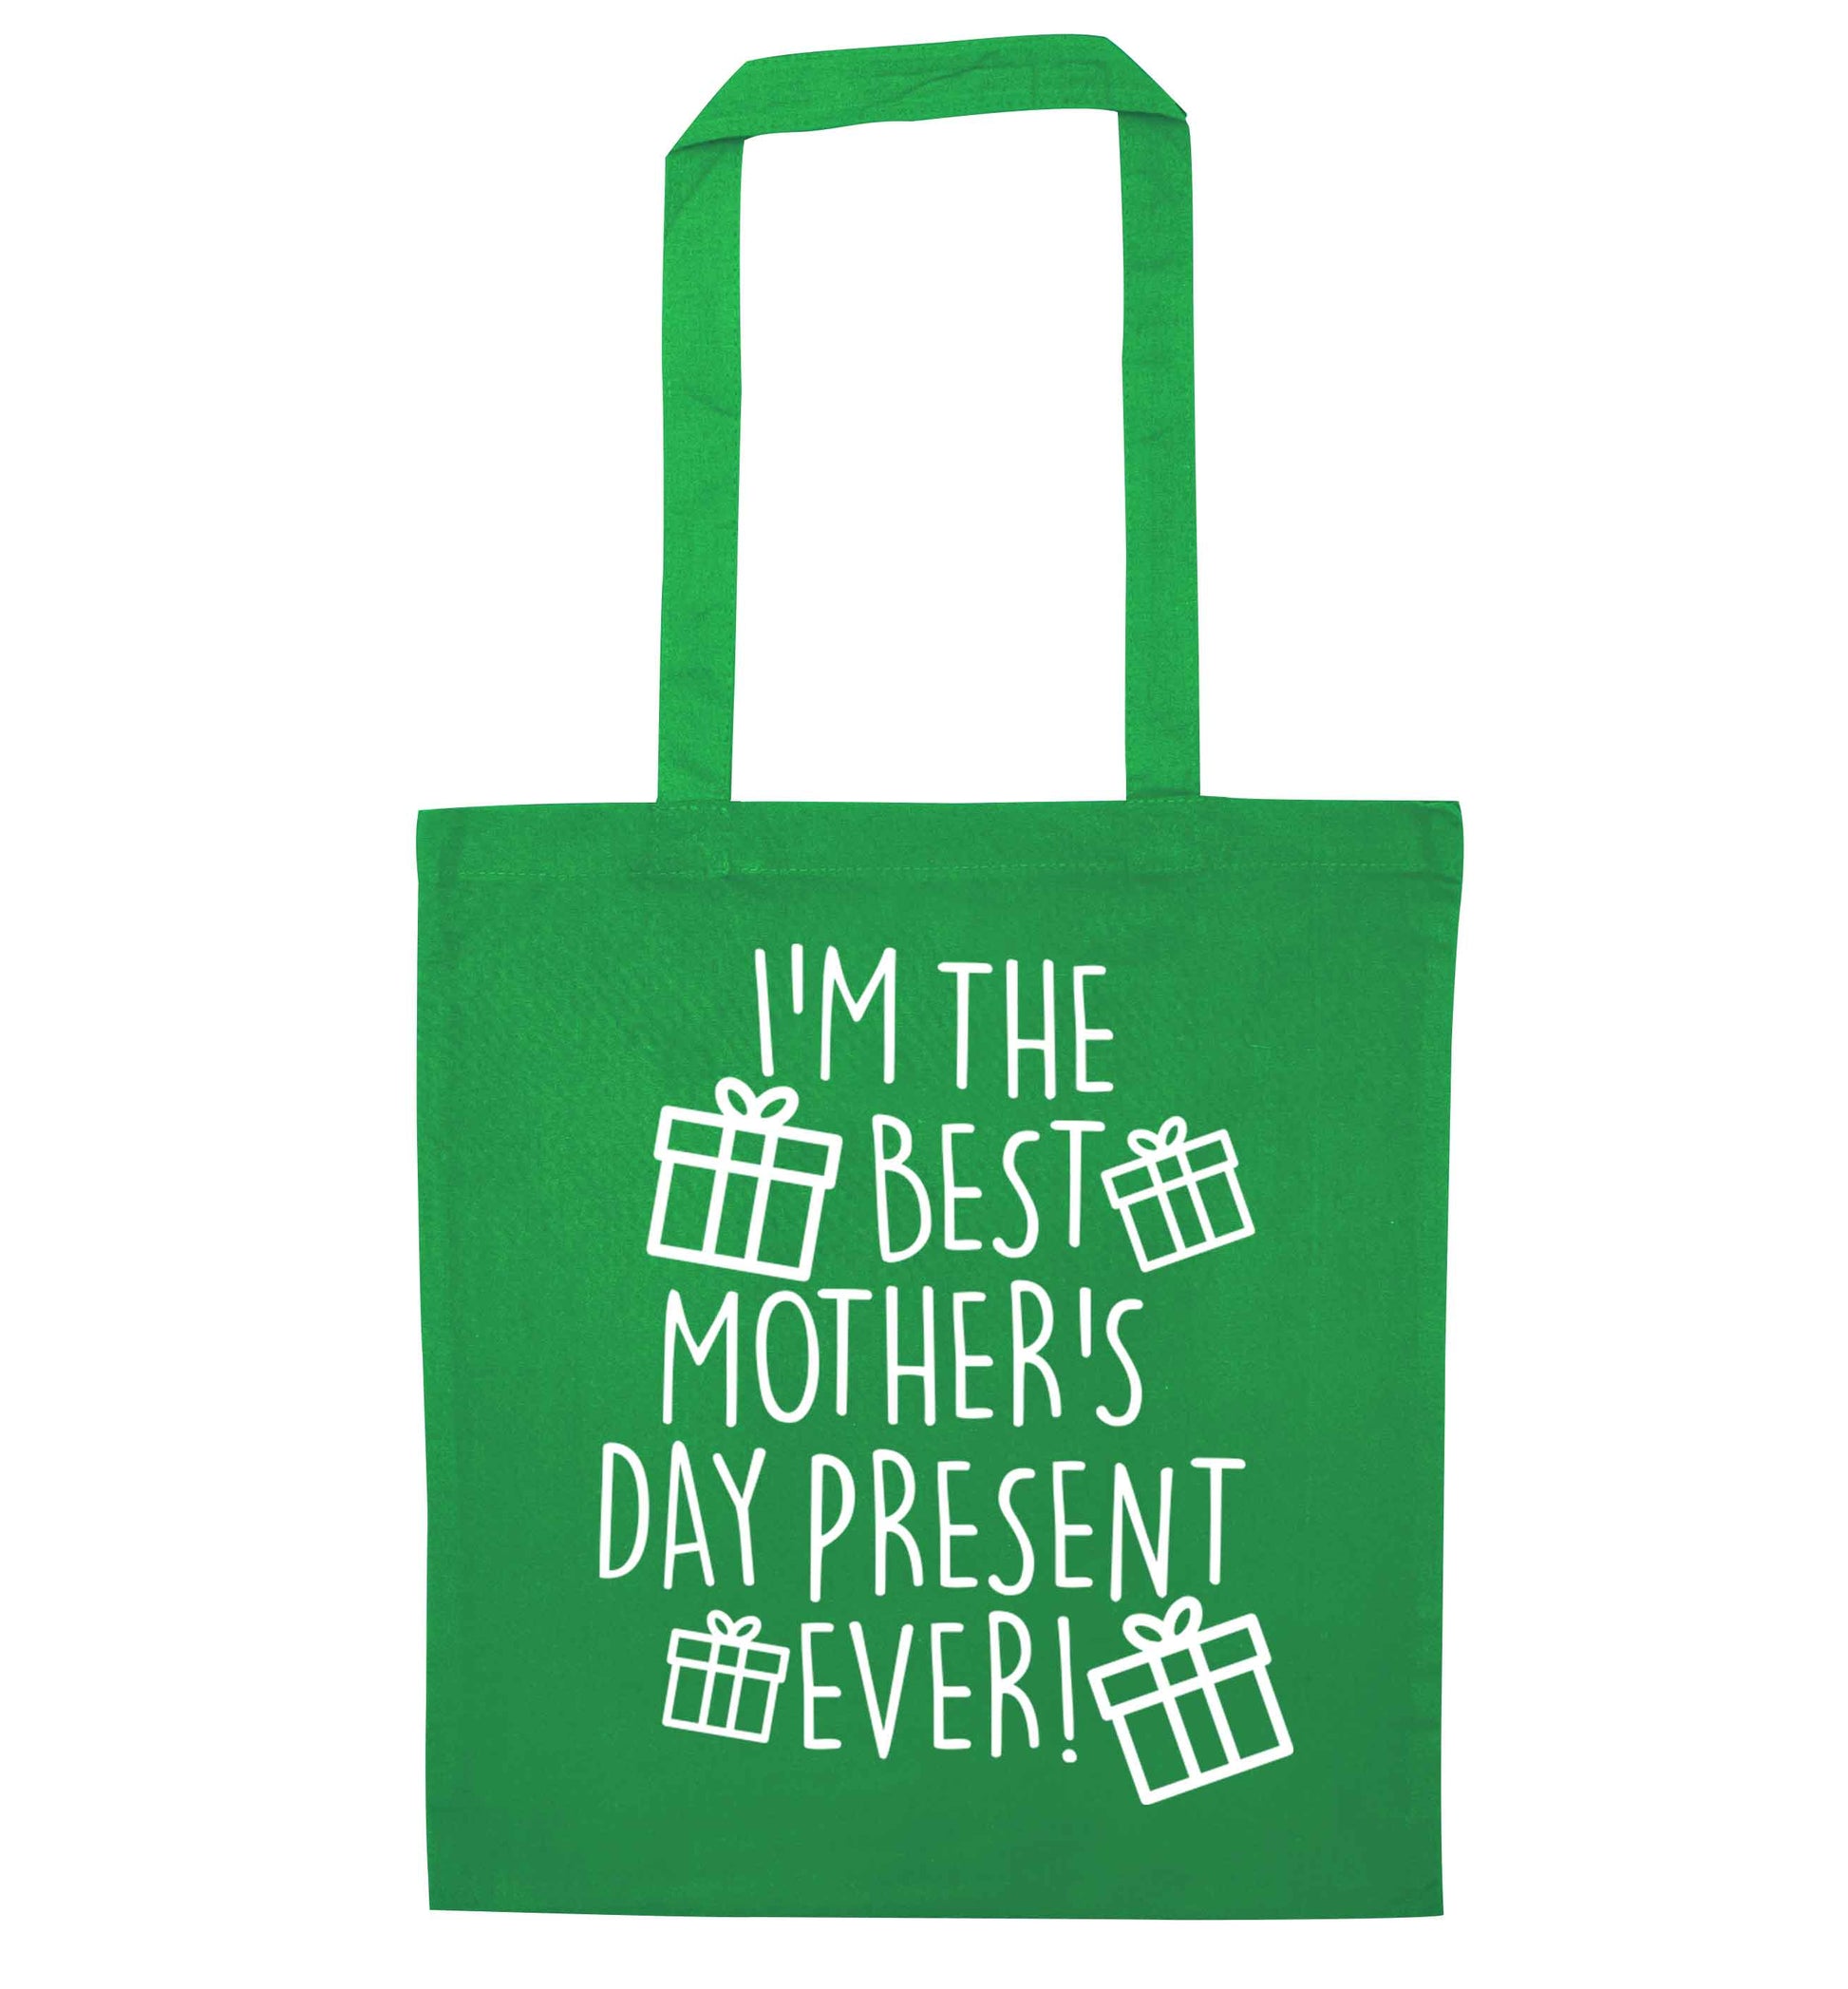 I'm the best mother's day present ever! green tote bag